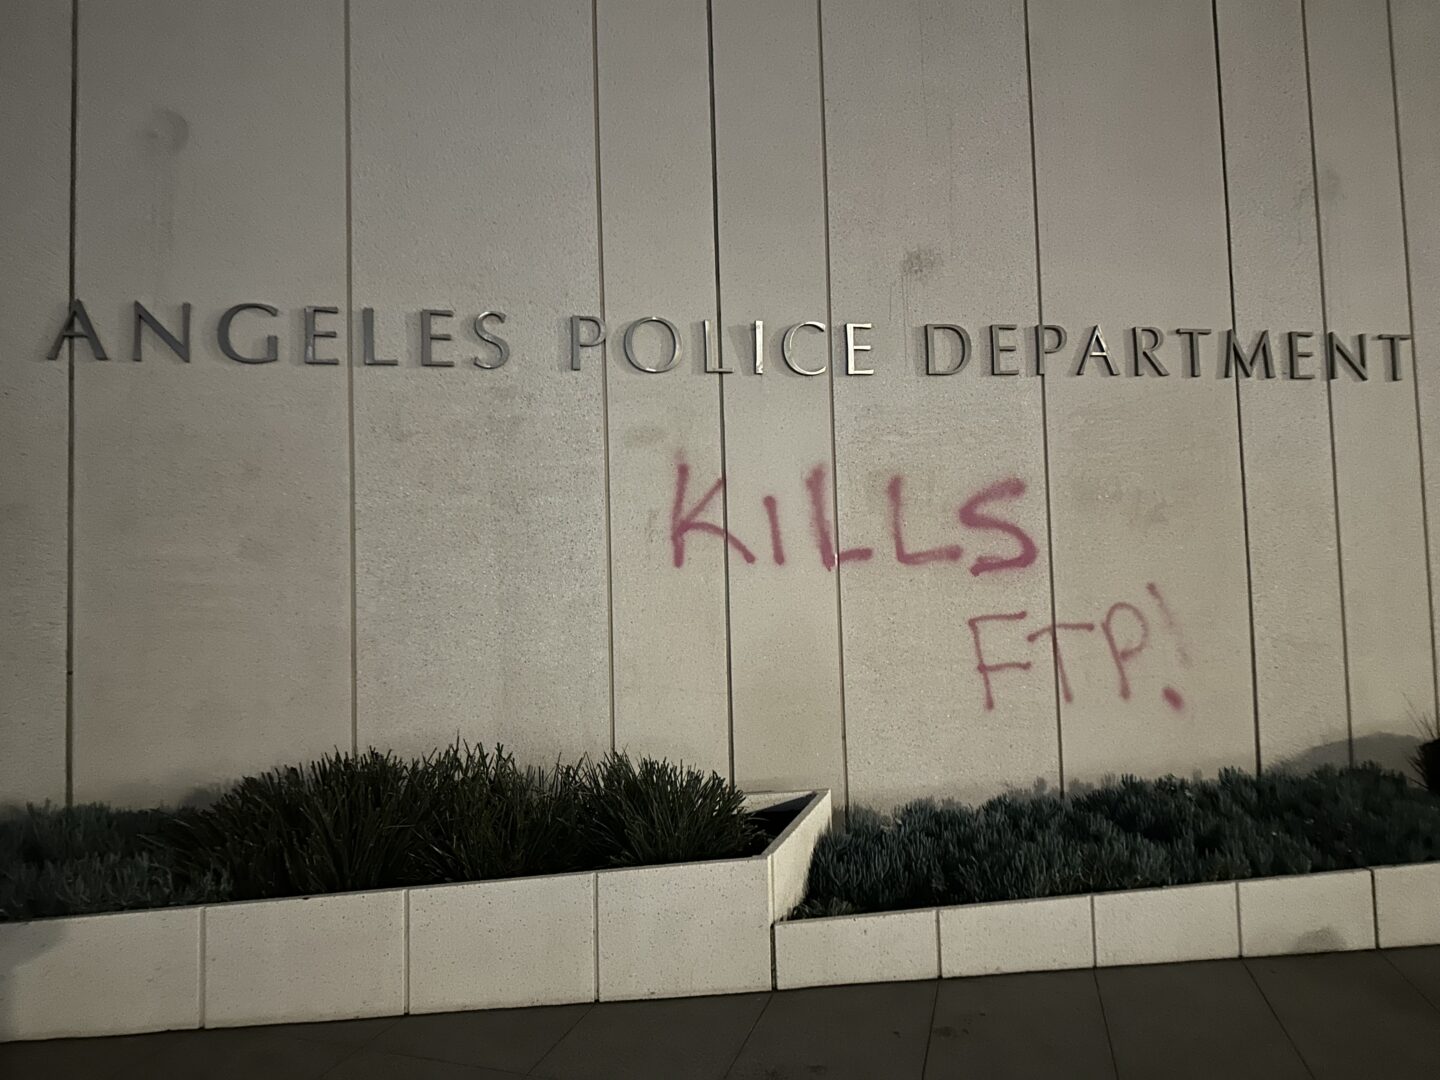 Graffiti on the wall of the LAPDHQ adding the word "KILLS" below the Los Angeles Police Department sign and "FTP!"